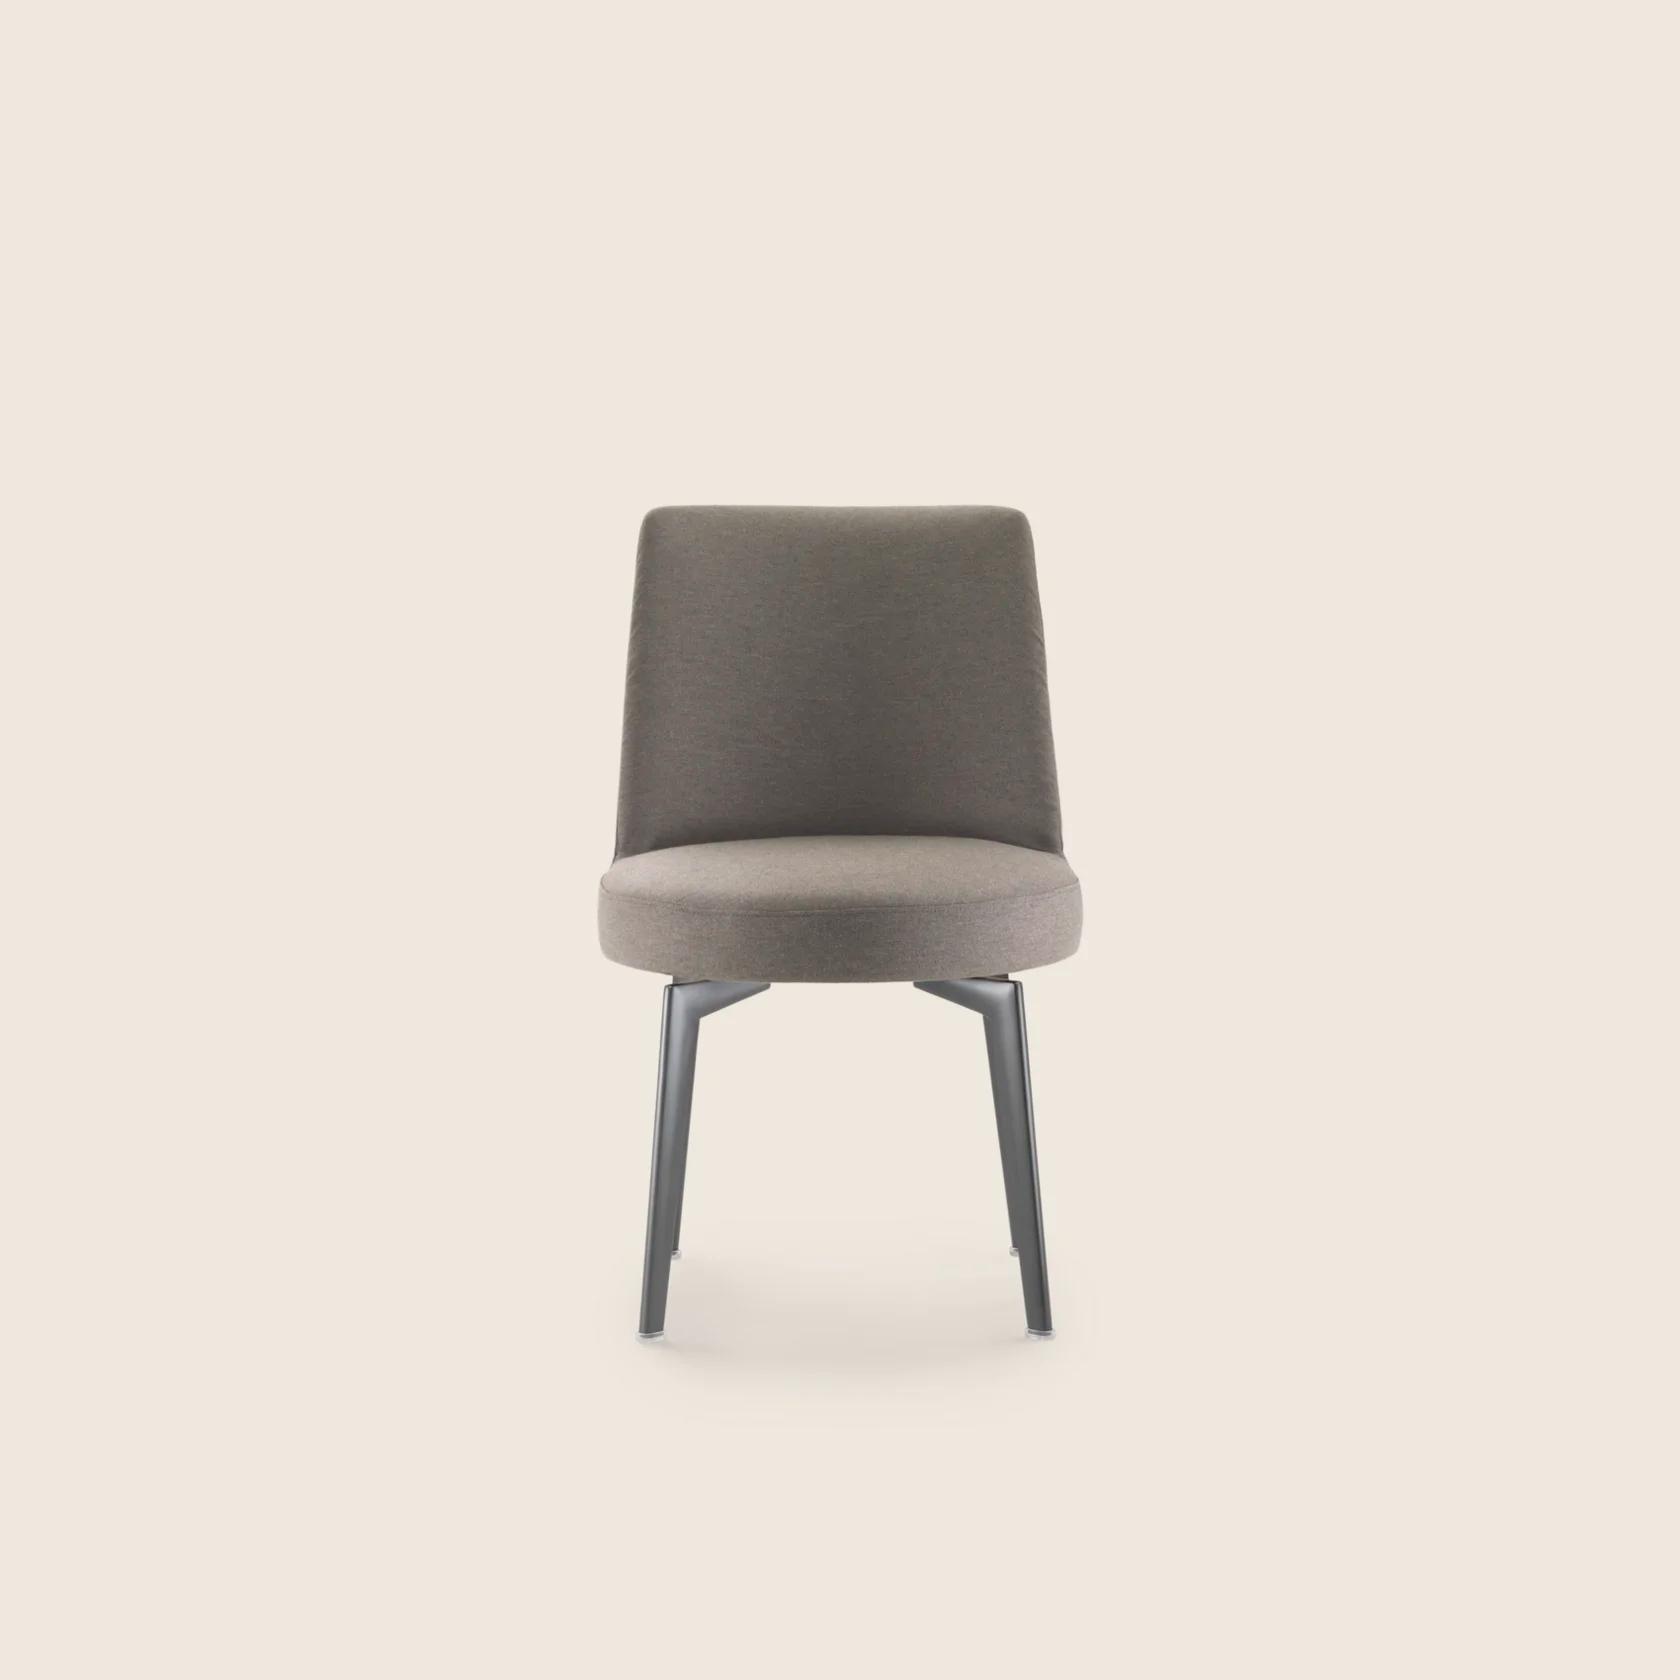 024601_HERA_CHAIR_14.png